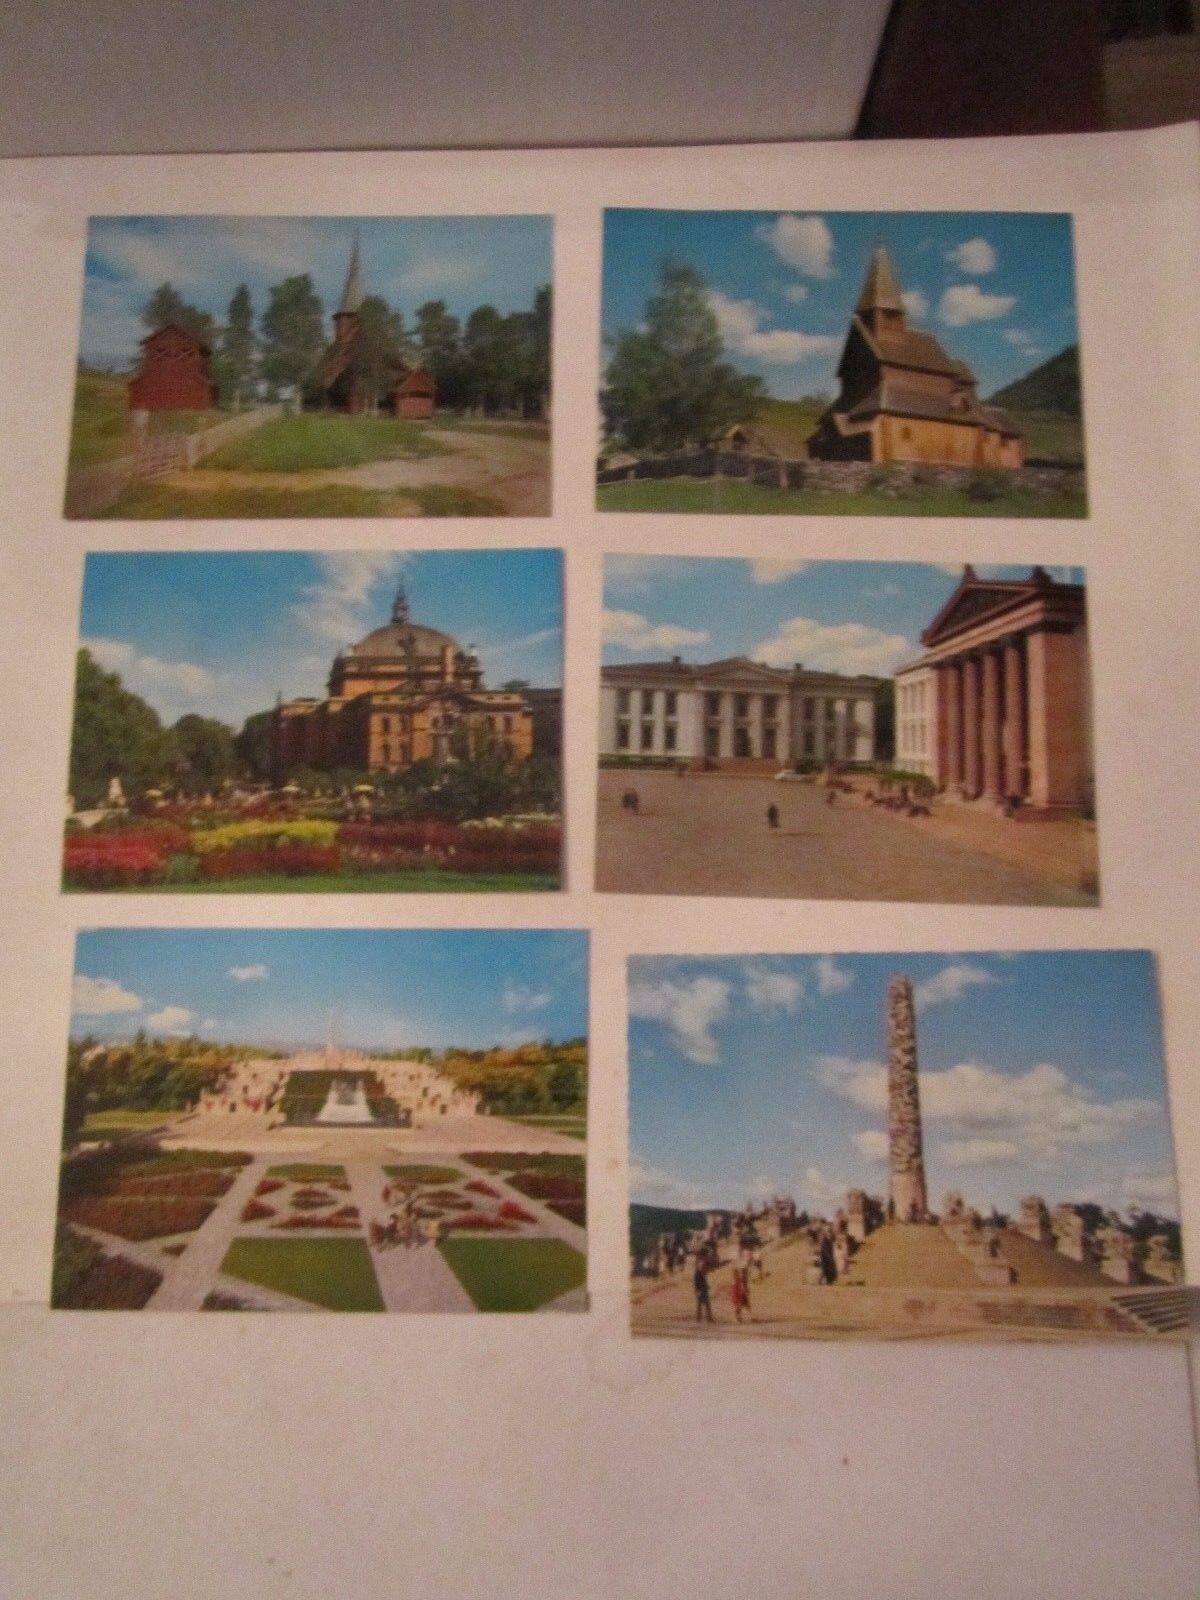 NOS 23 OSLO, NORWAY POSTCARDS - MITTET - LOT 4 - TUB BBA-7